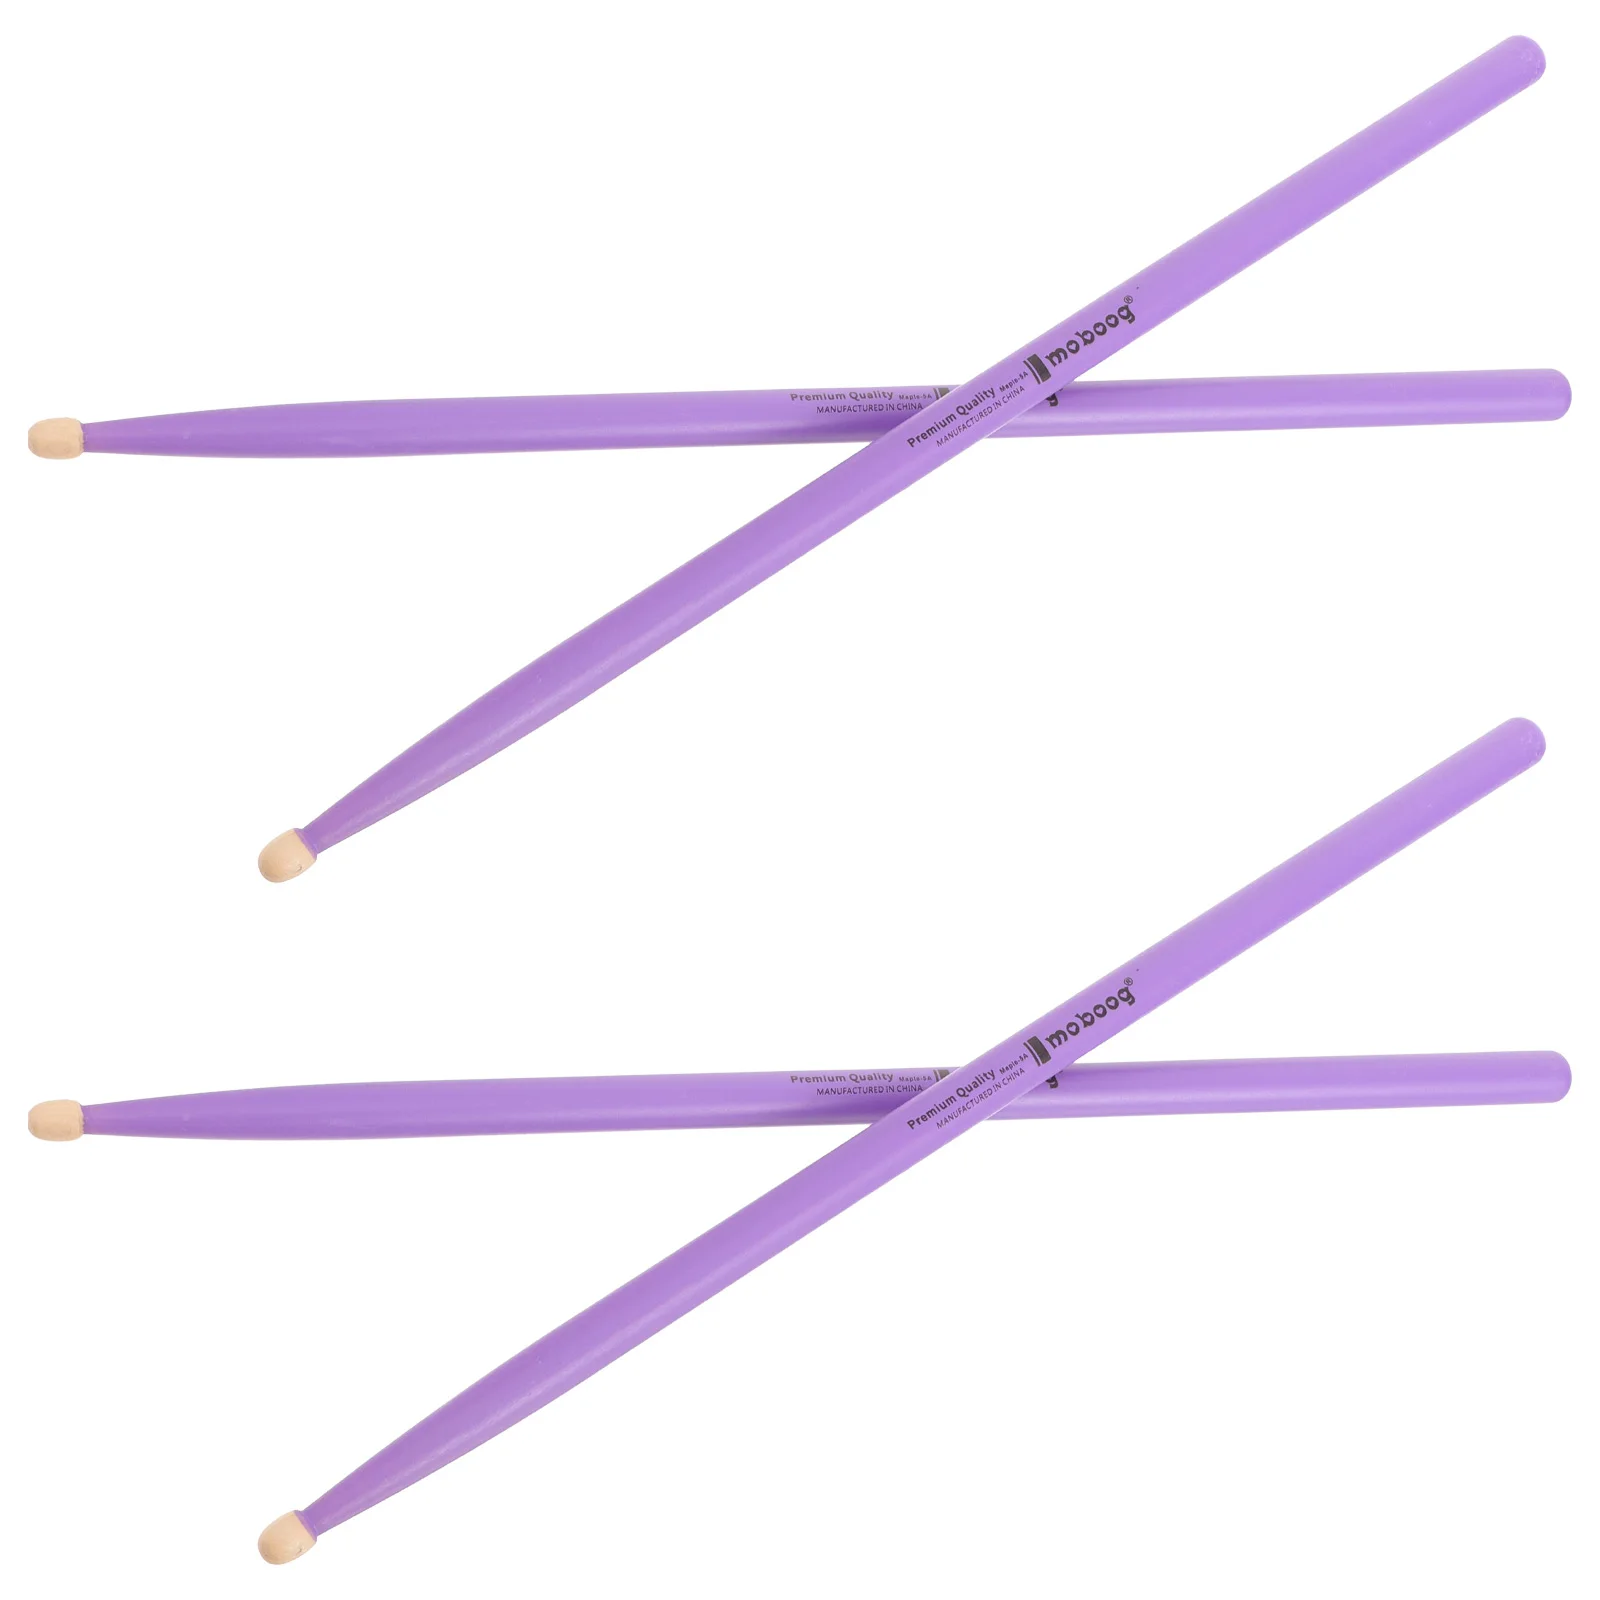 4pcs Maple Sticks Simple Drumsticks Percussion Instruments Stick Wooden Drumsticks Cute Instruments For Adult Students To Use